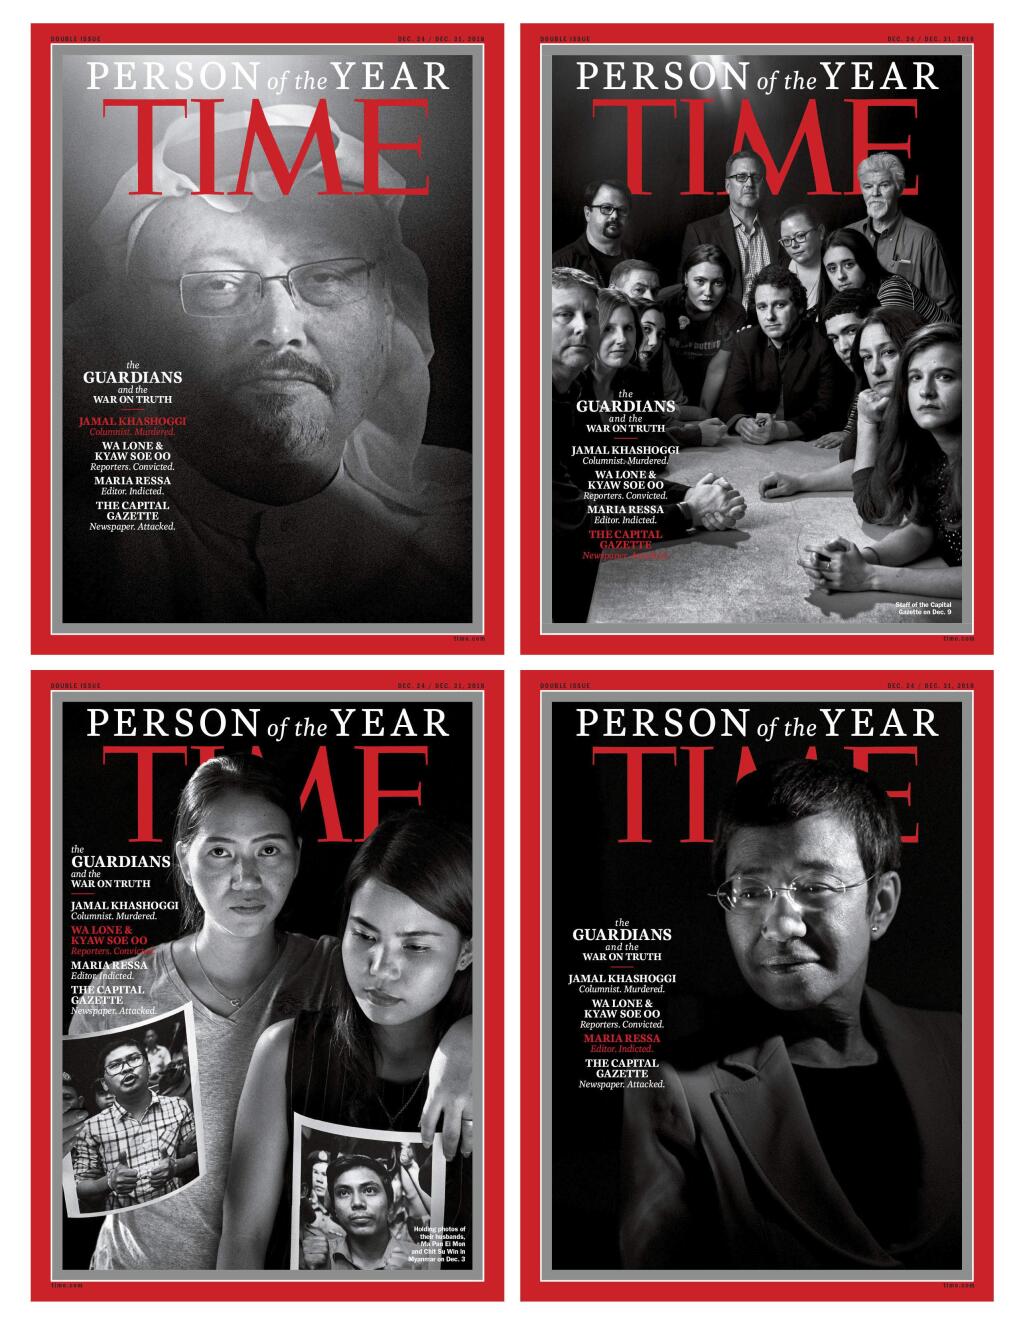 This combination photo provided by Time Magazine shows their four covers for the 'Person of the Year,' announced Tuesday, Dec. 11, 2018. The covers show Jamal Khashoggi, top left, members of the Capital Gazette newspaper, of Annapolis, Md., top right, Wa Lone and Kyaw Soe Oo, bottom left, and Maria Ressa. The covers, which Time called the “guardians and the war on truth,” were selected 'for taking great risks in pursuit of greater truths, for the imperfect but essential quest for facts that are central to civil discourse, for speaking up and speaking out.' (Time Magazine via AP)